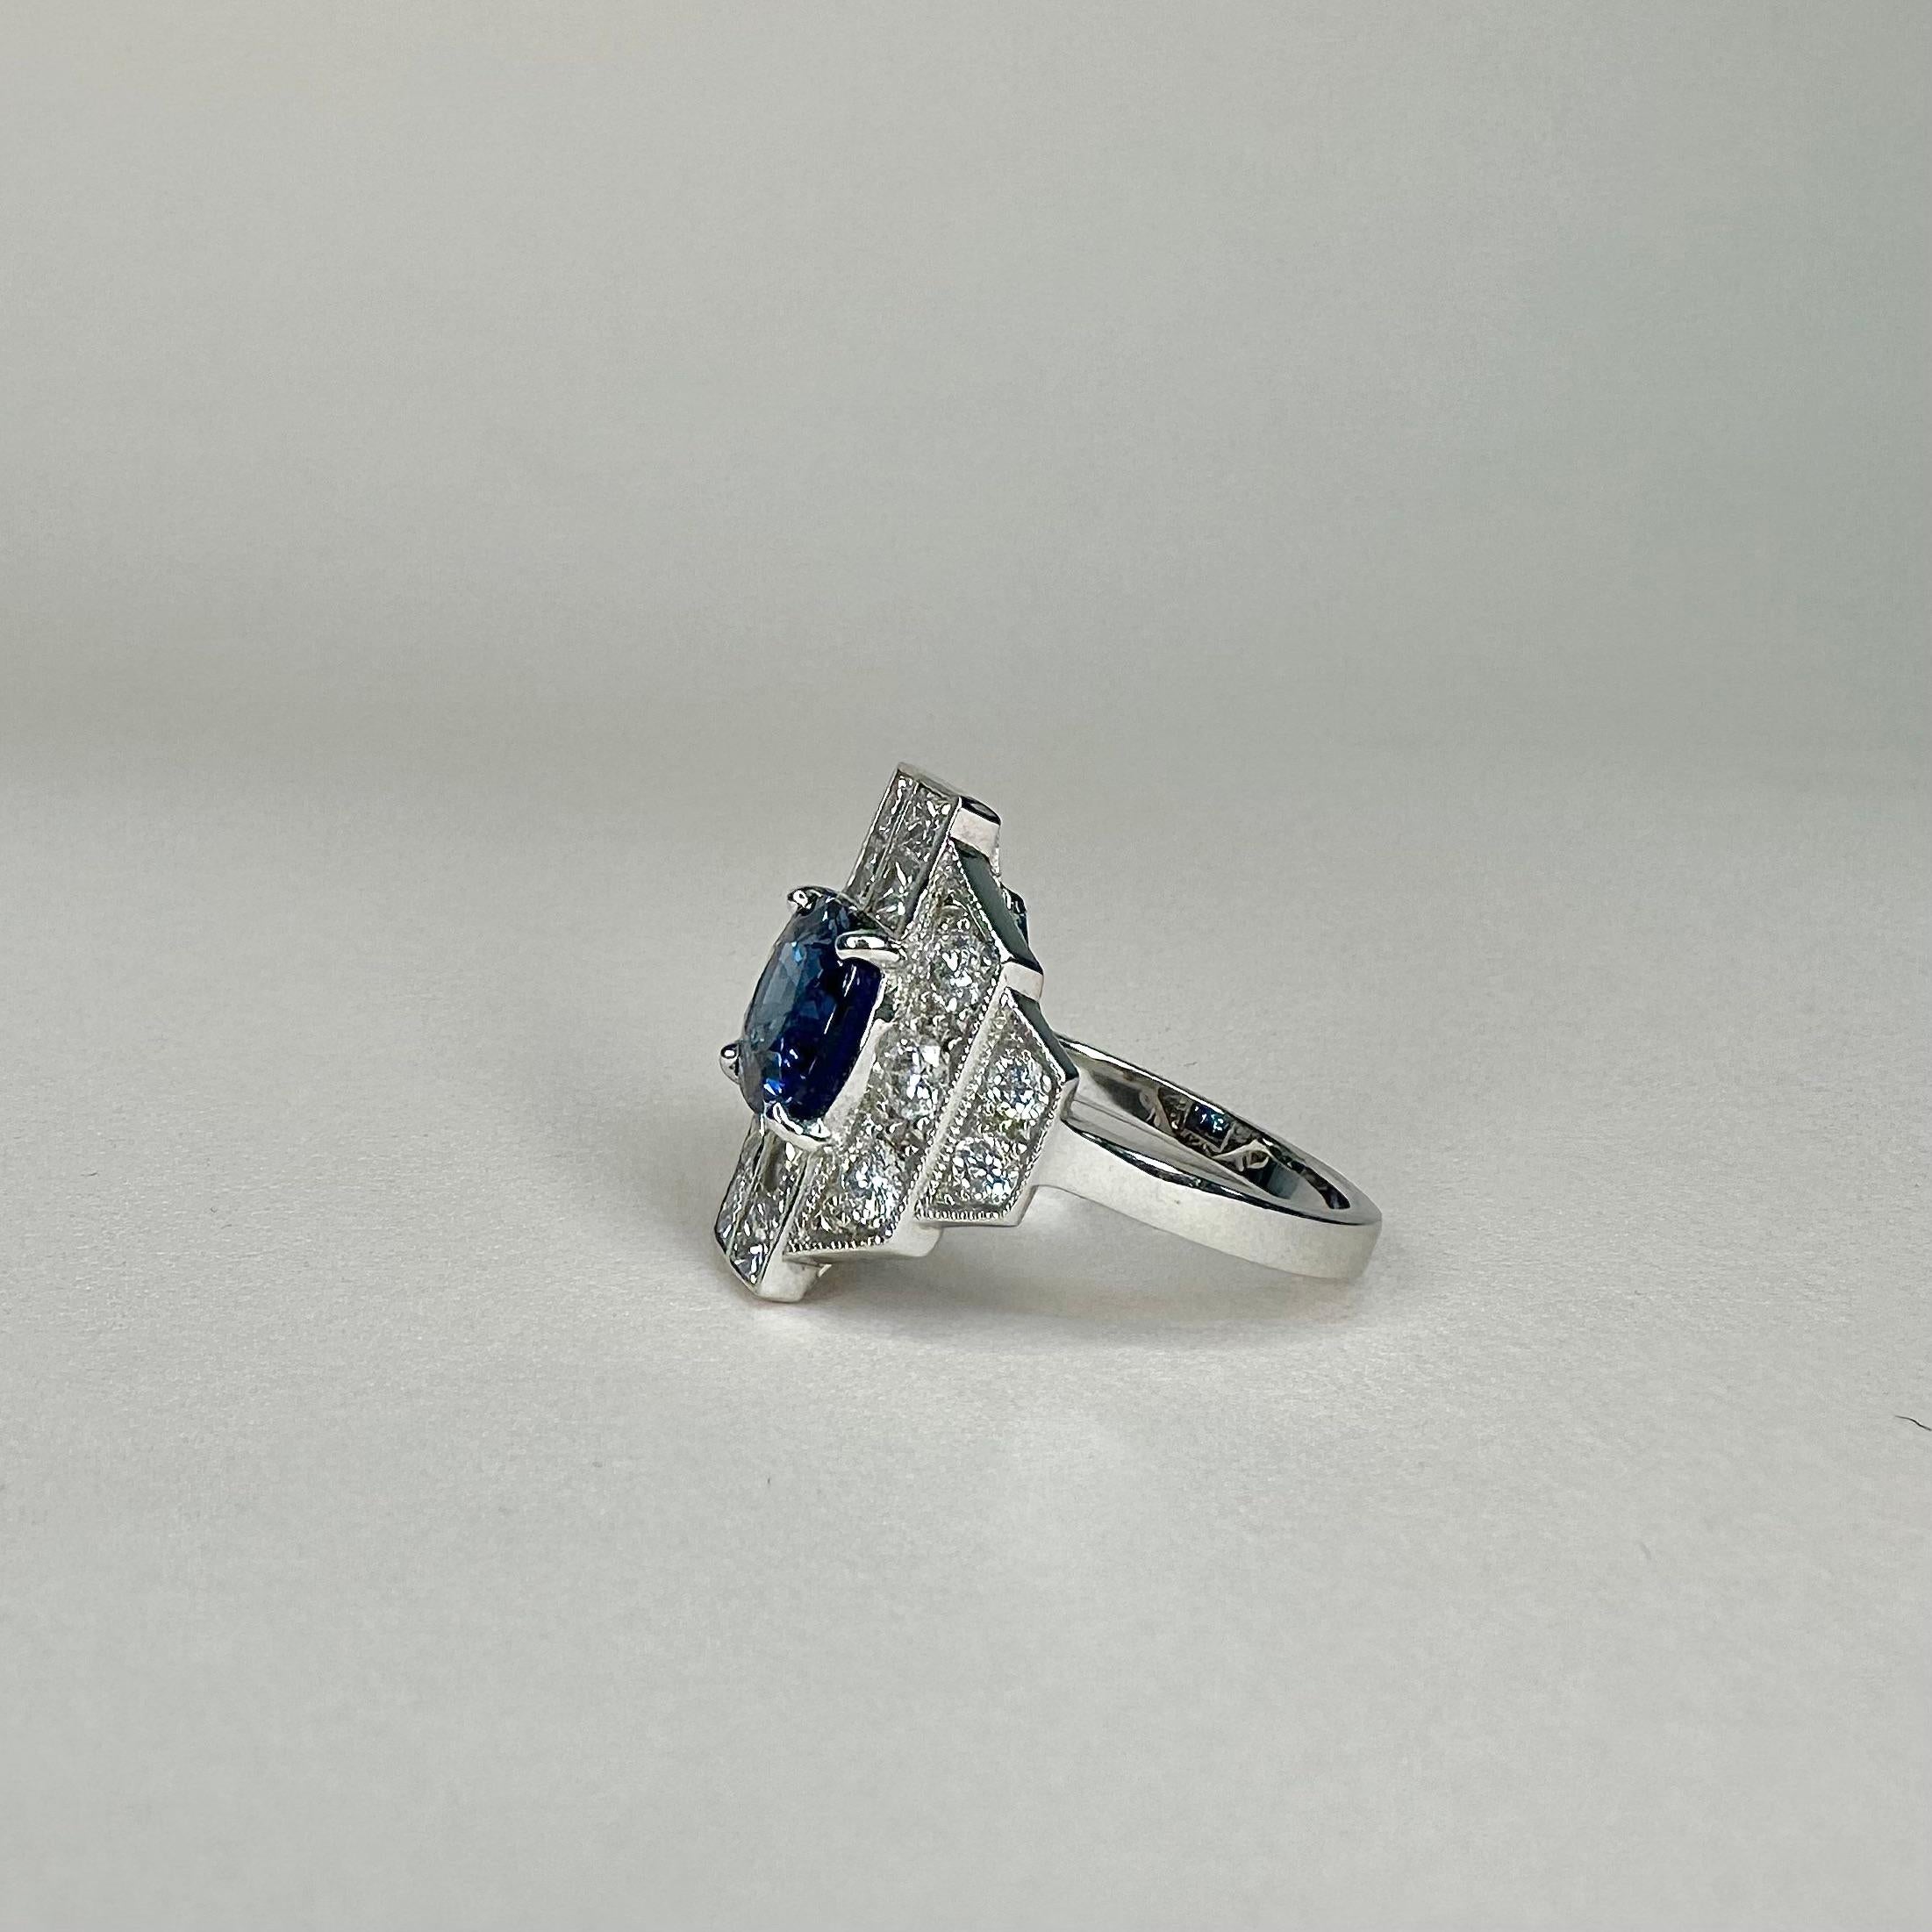 For Sale:  18k White Gold 2.65 Ct Royal Blue Cushion Sapphire Ring Set with 1.69 Ct Diamond 4